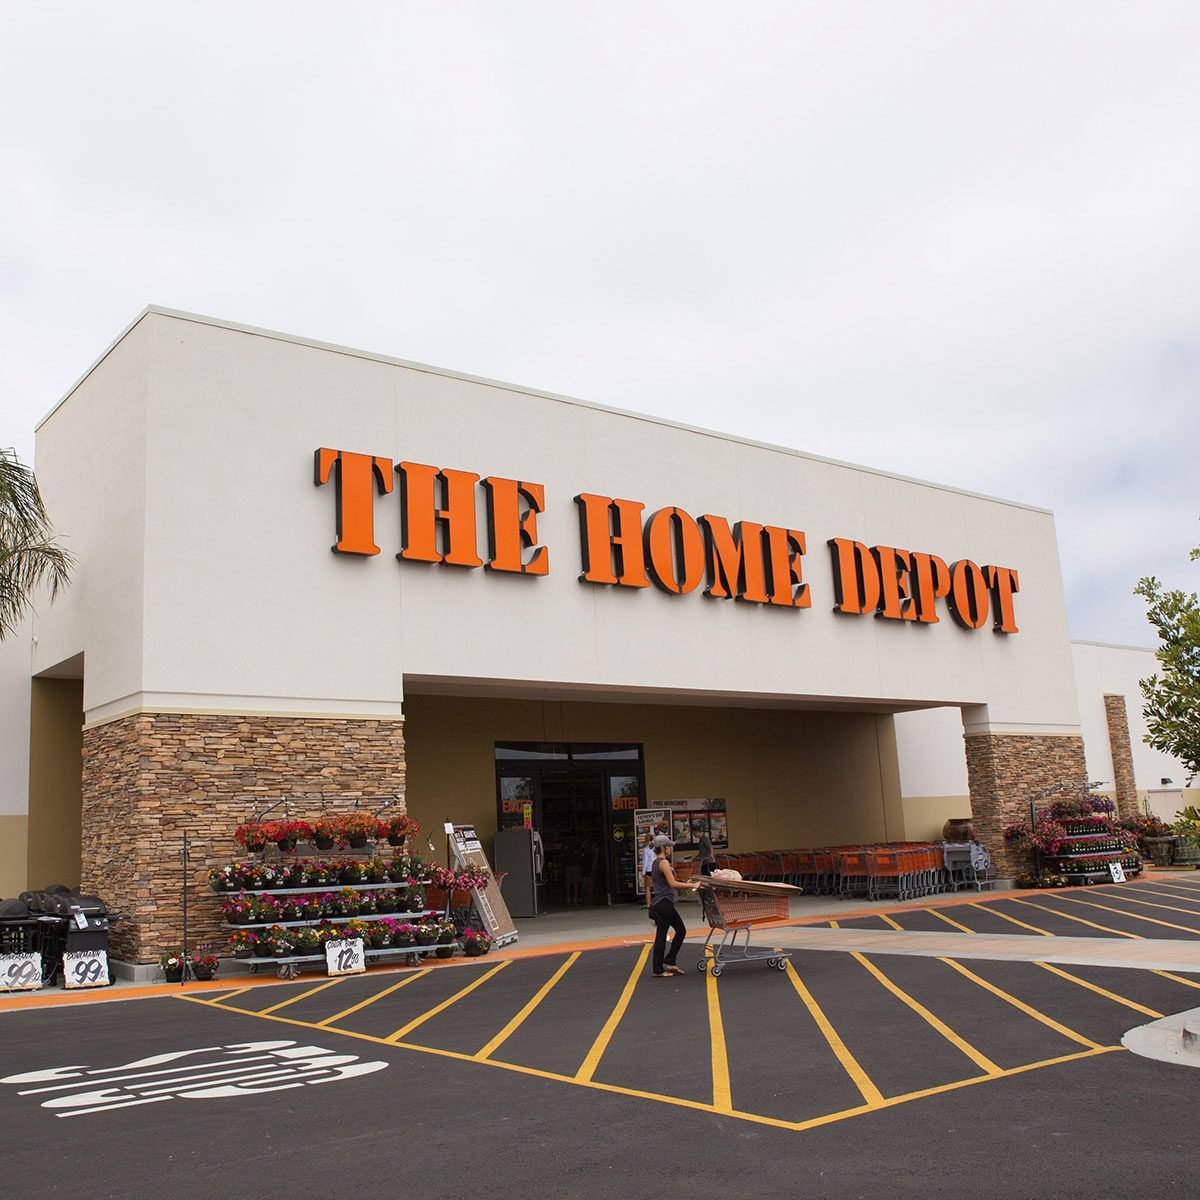 14 Things Home Depot Employees Won't Tell You